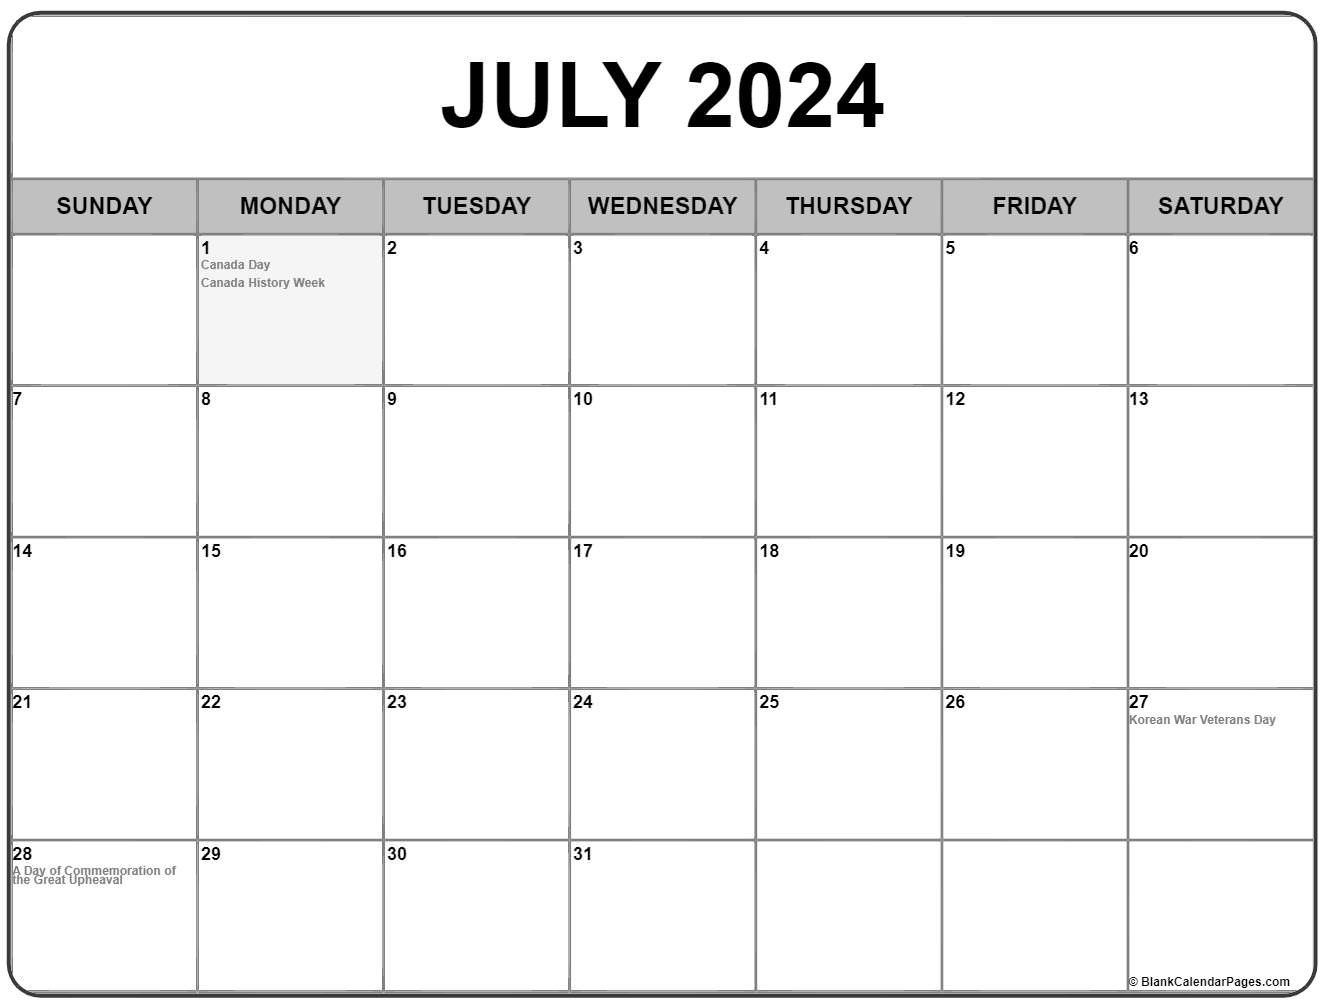 July 2020 calendar with holidays in Canada